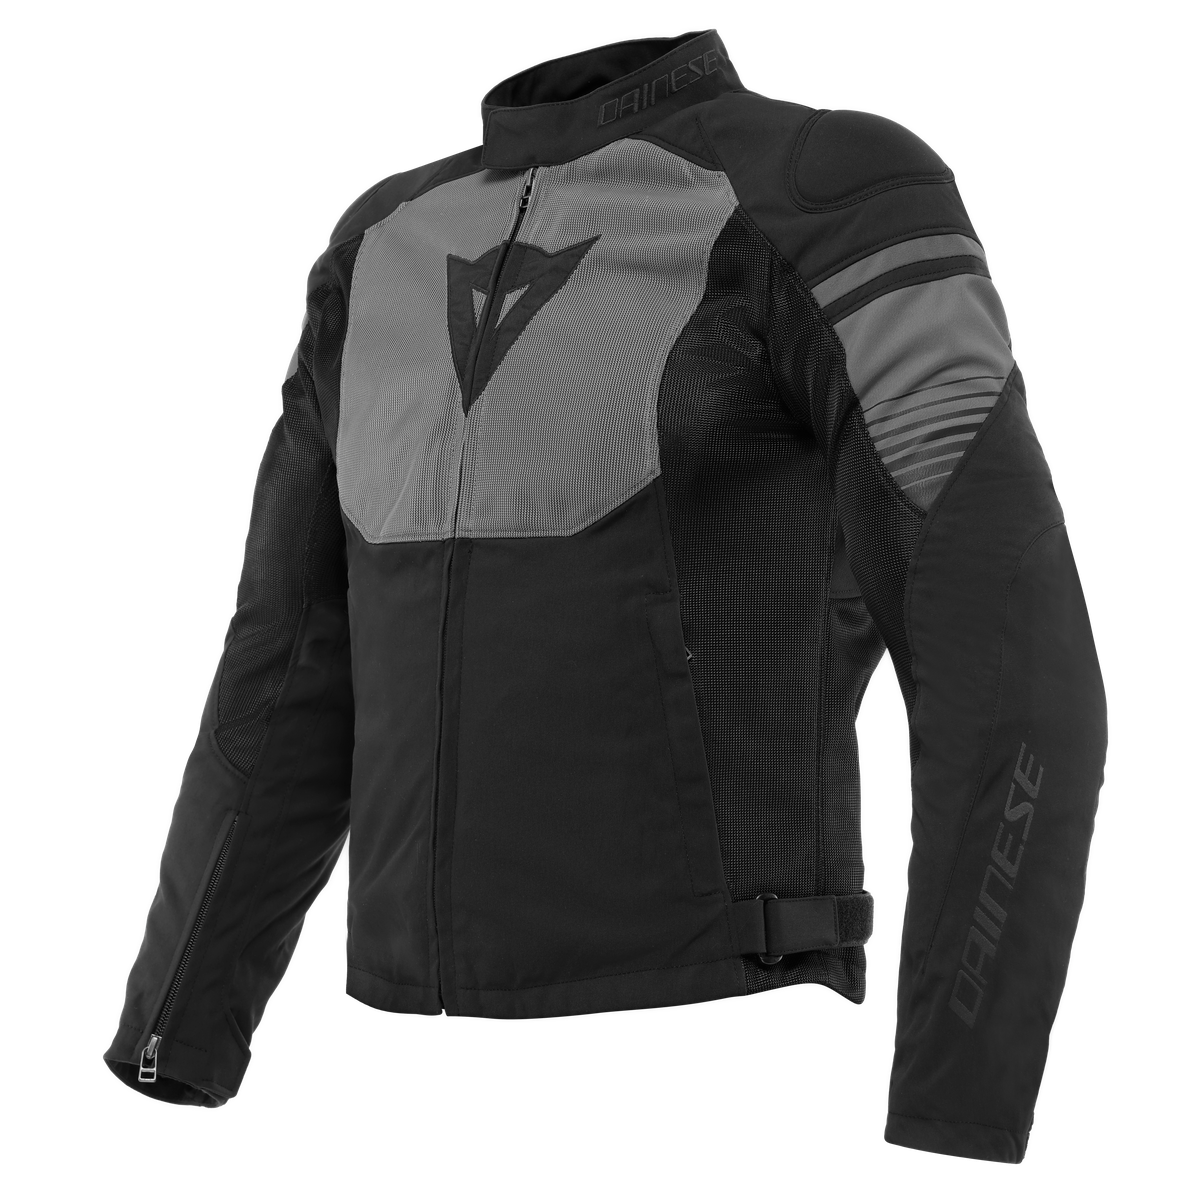 Image of Dainese Air Fast Tex Jacket Black Gray Gray Size 44 ID 8051019417862